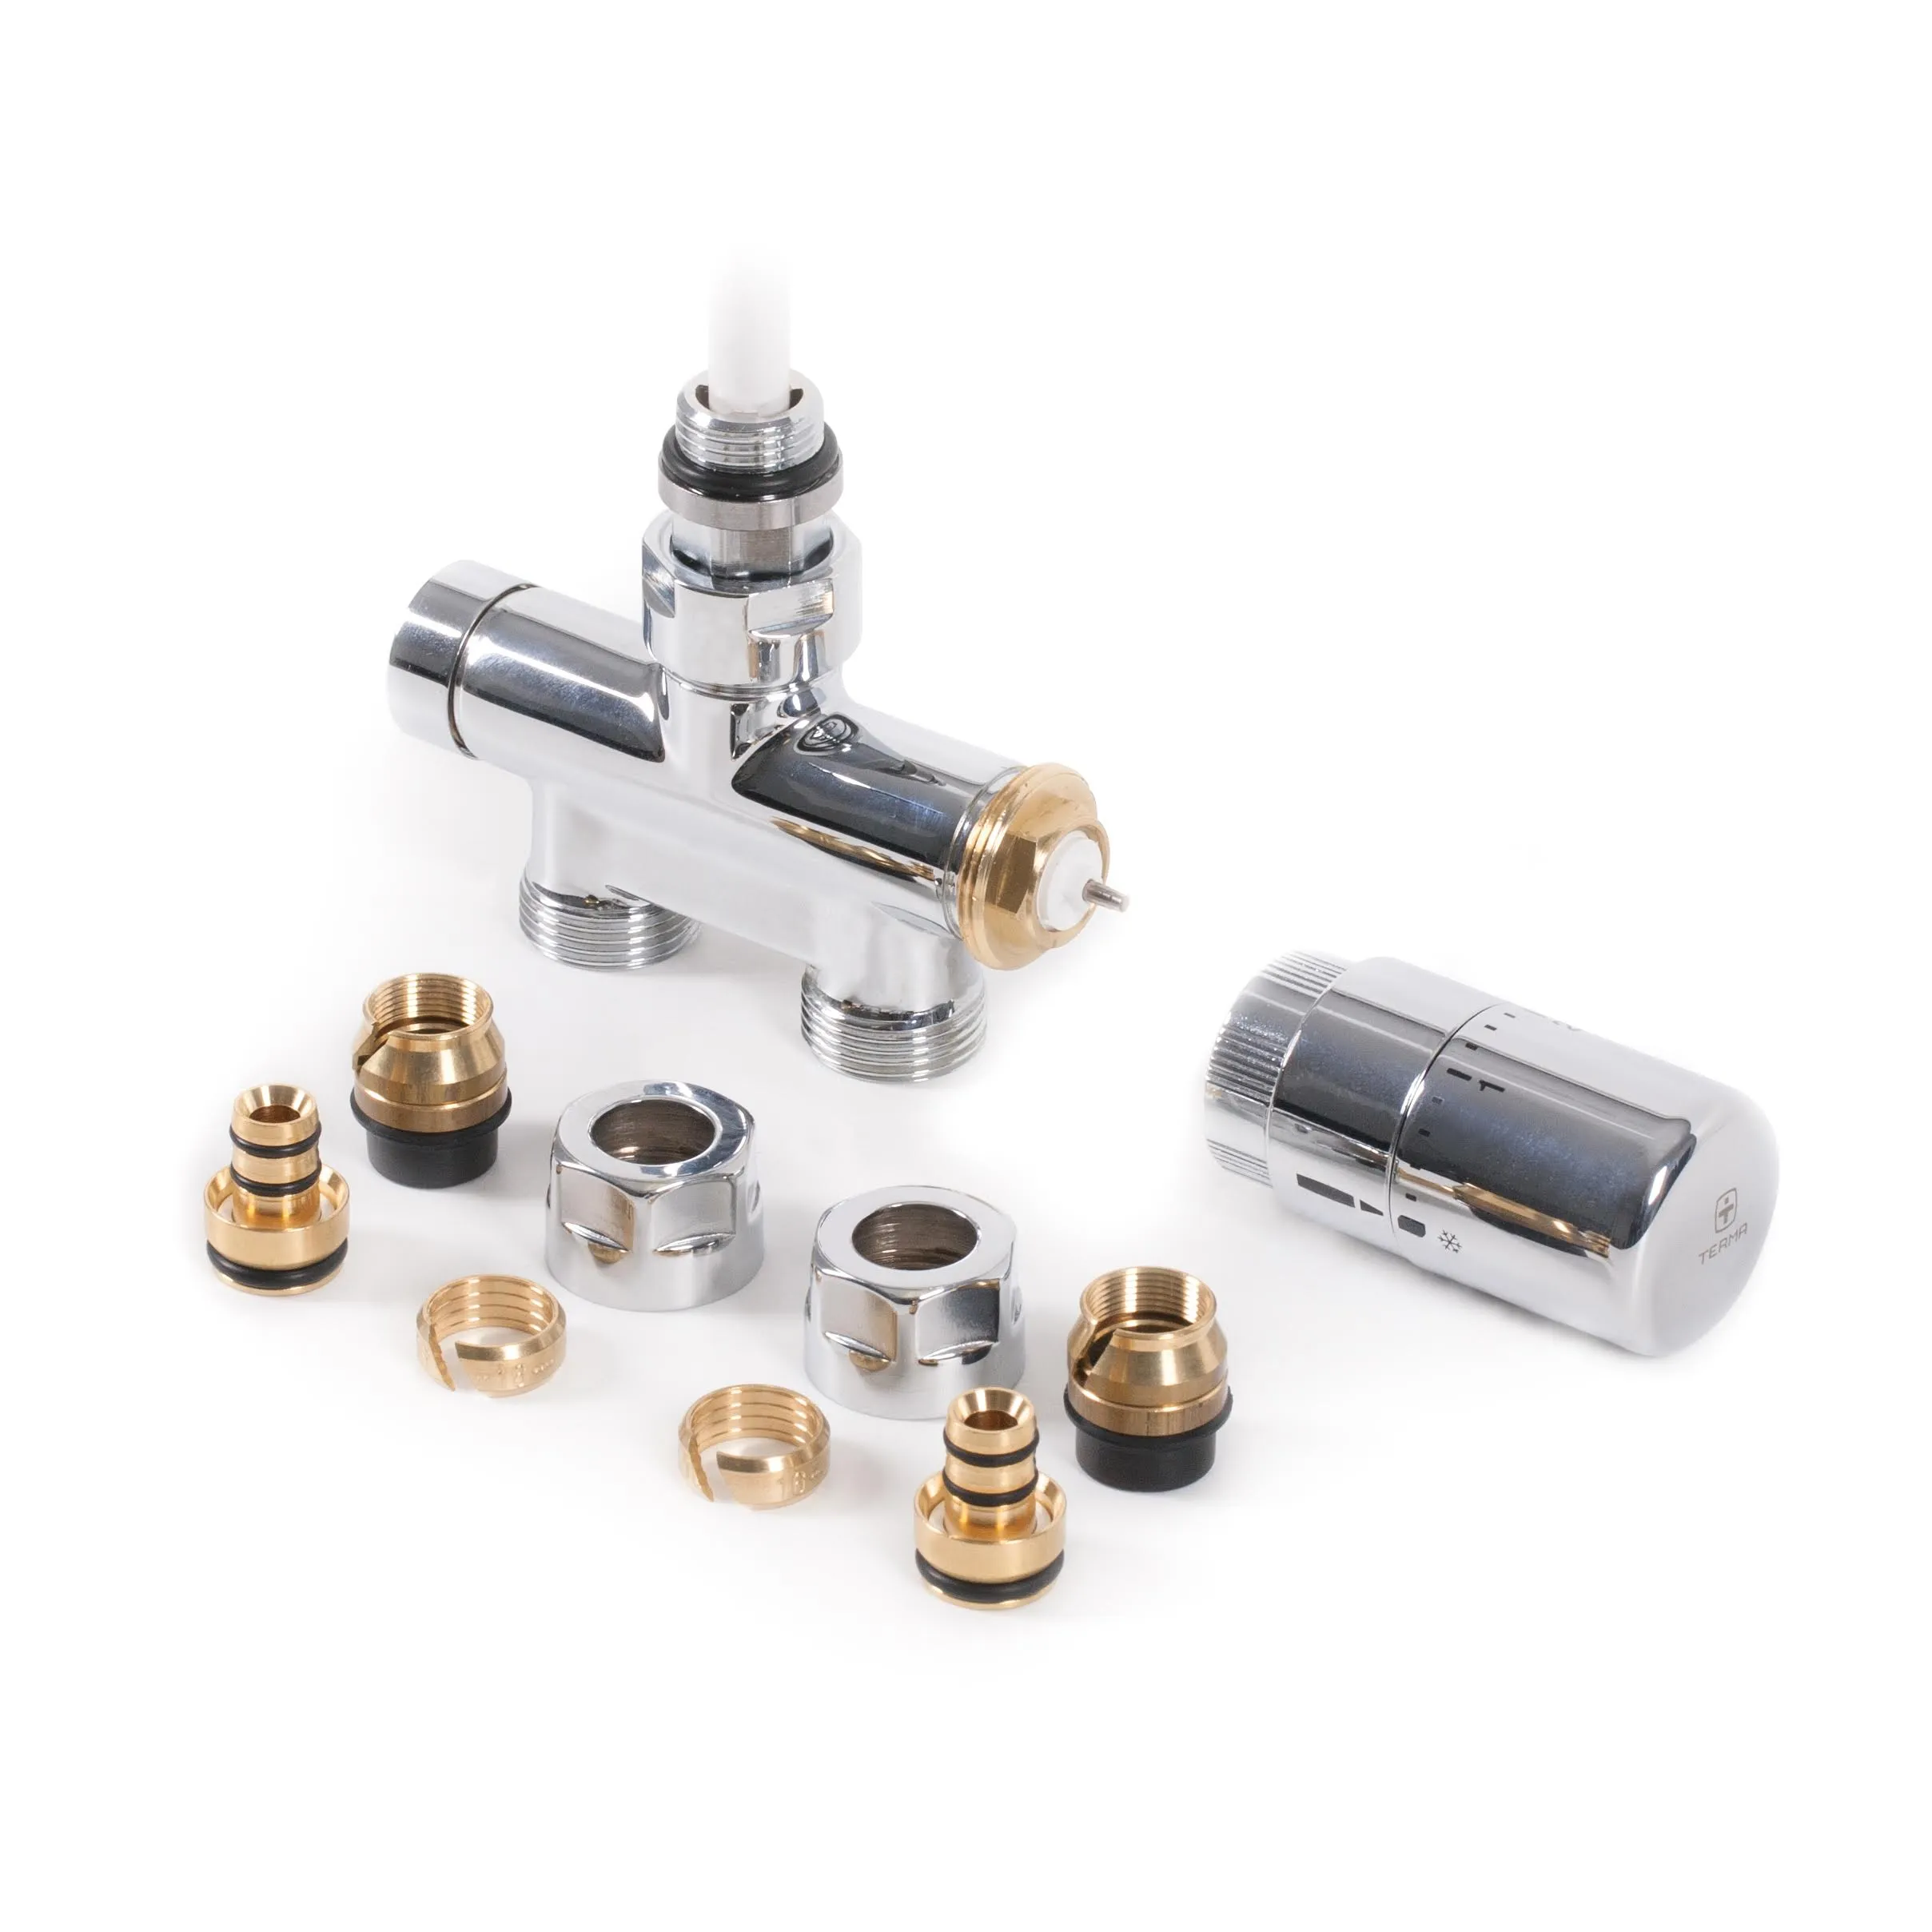 Terma Carlo Poletti Integrated Straight Chrome Thermostatic Valve With Immersion Tube Set Dual Fuel